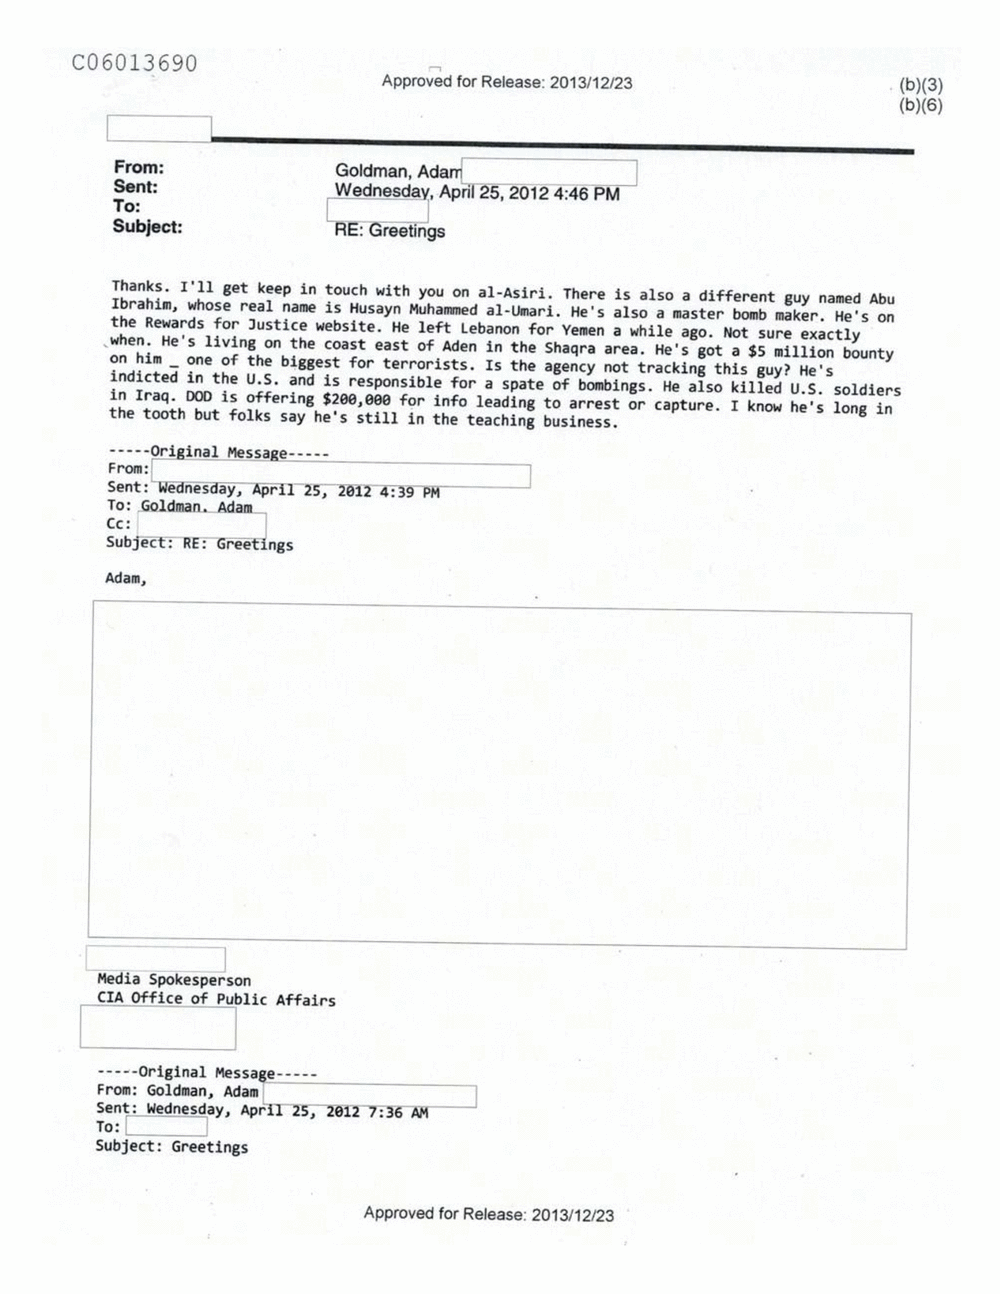 Page 548 from Email Correspondence Between Reporters and CIA Flacks